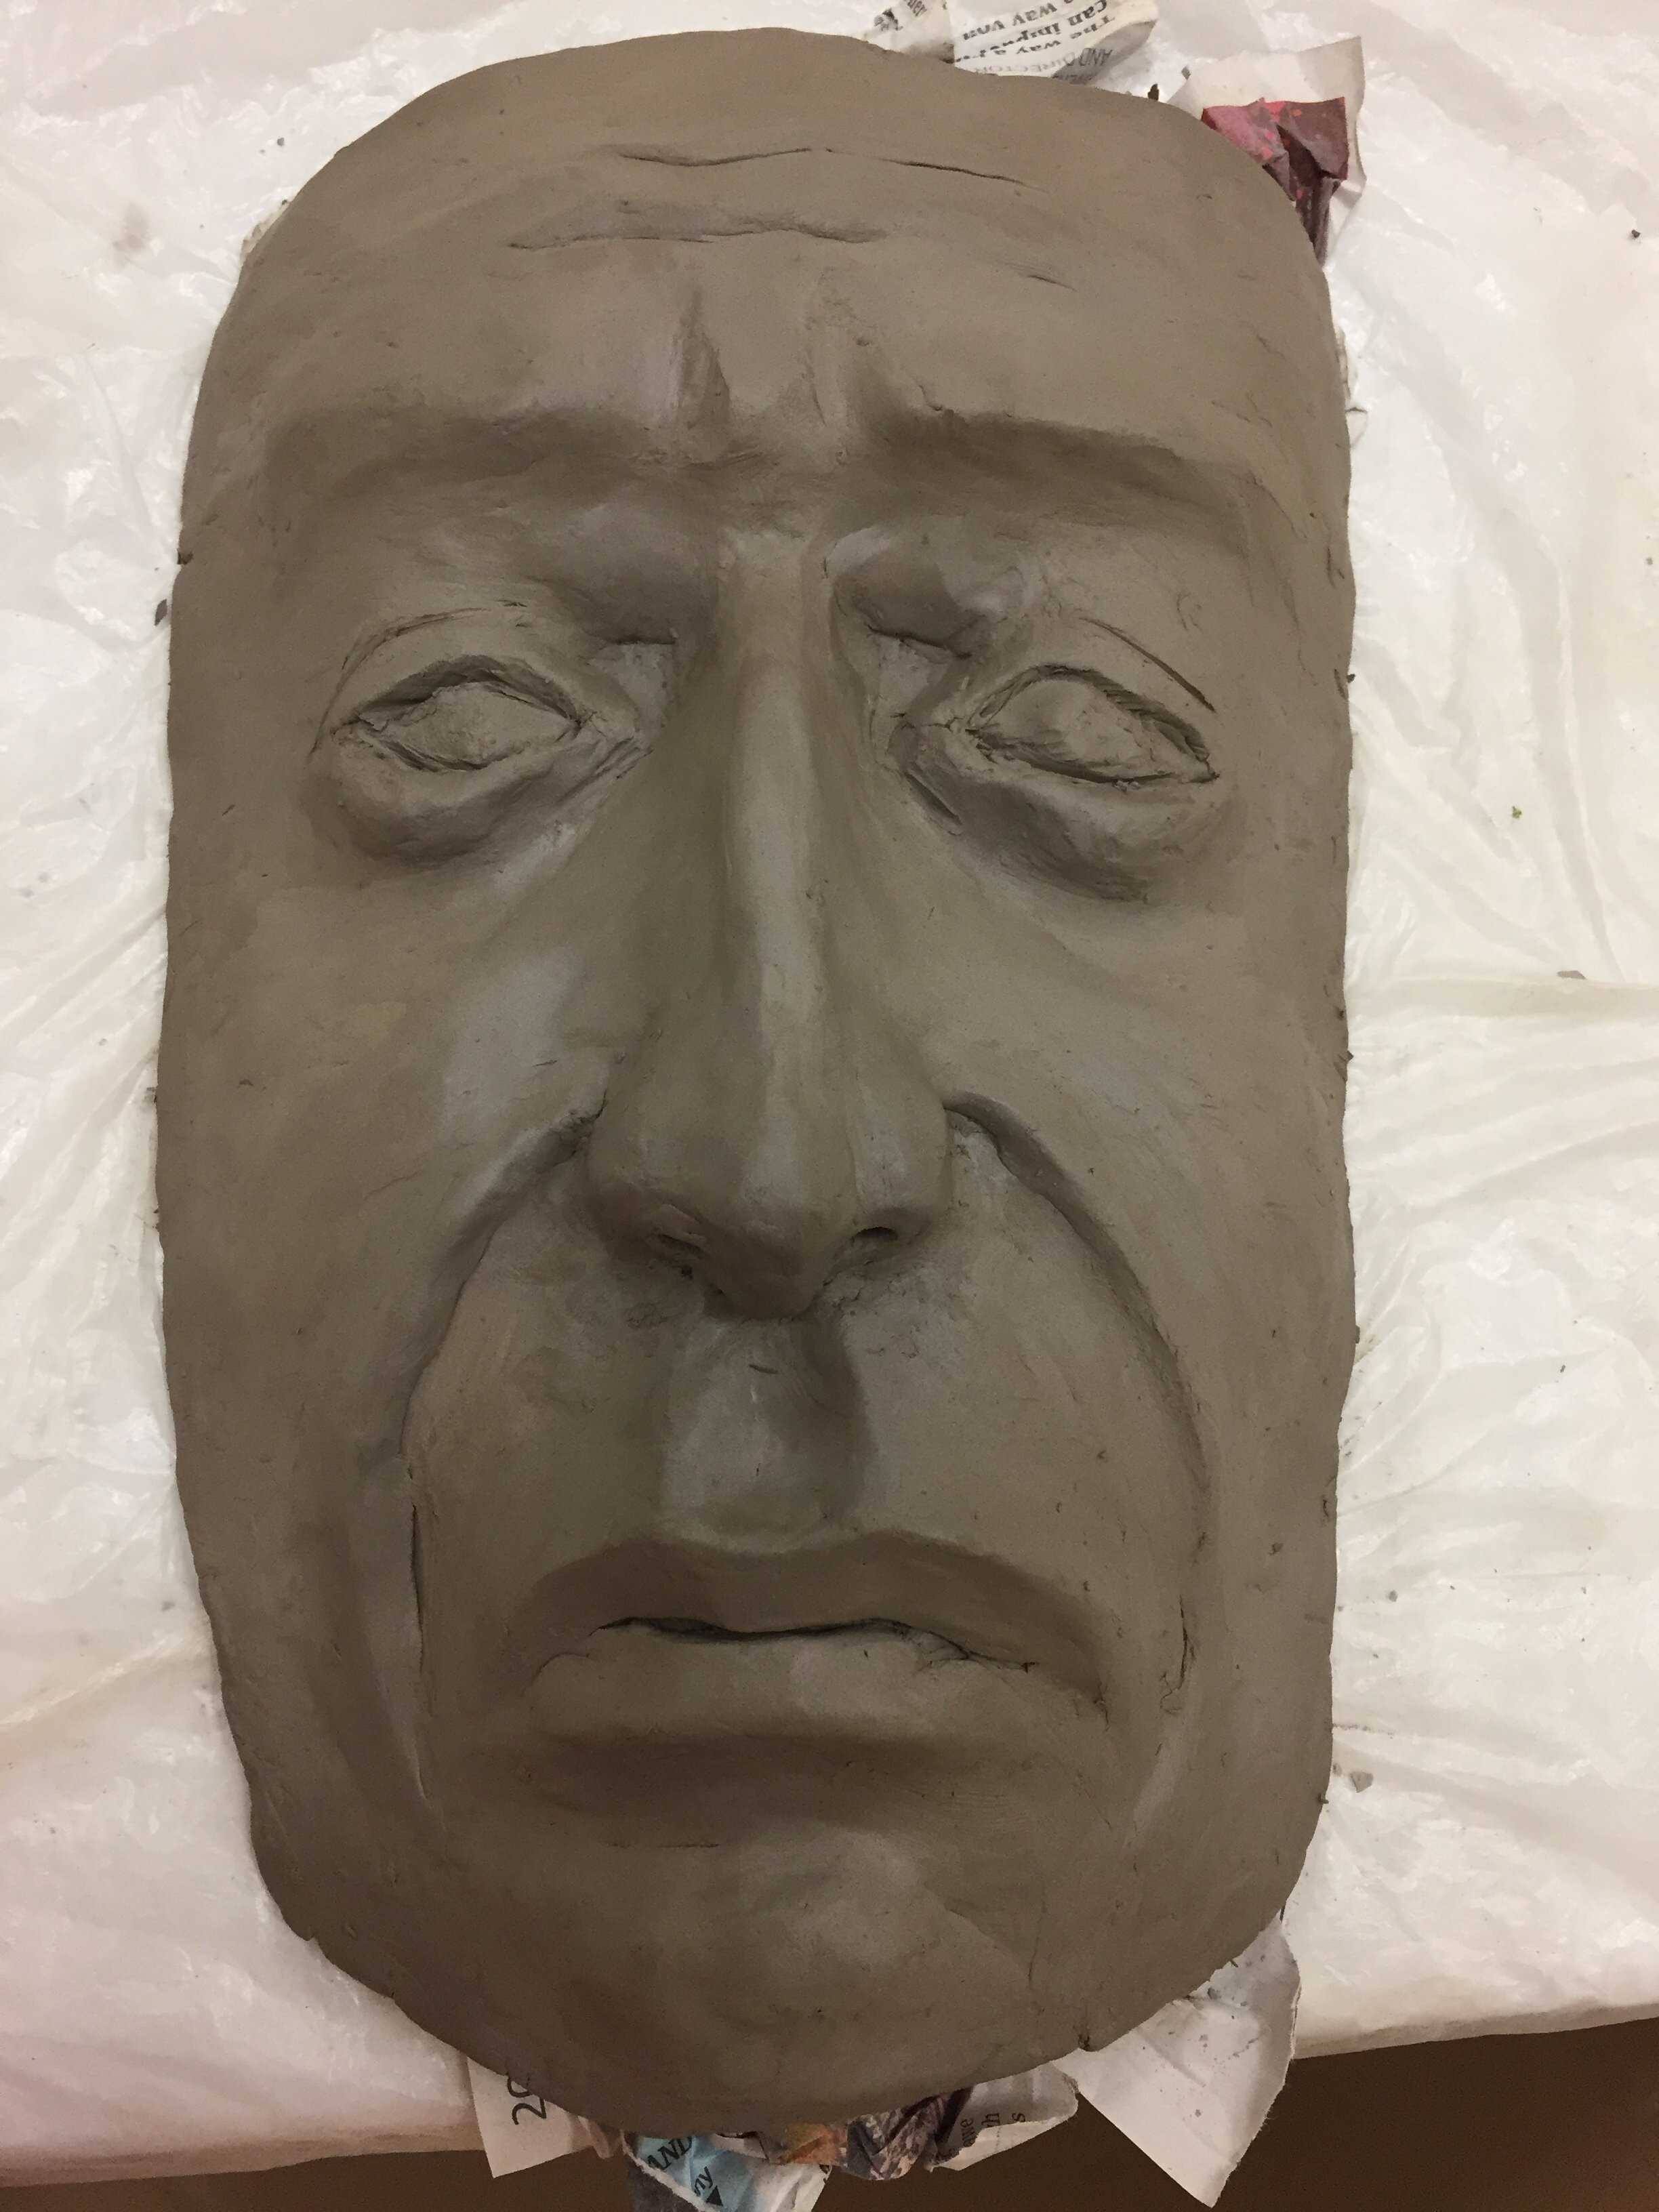 Professional Development Activity Away Day, Perth, Sadness Facial Expression of Emotion, Clay Sculpture